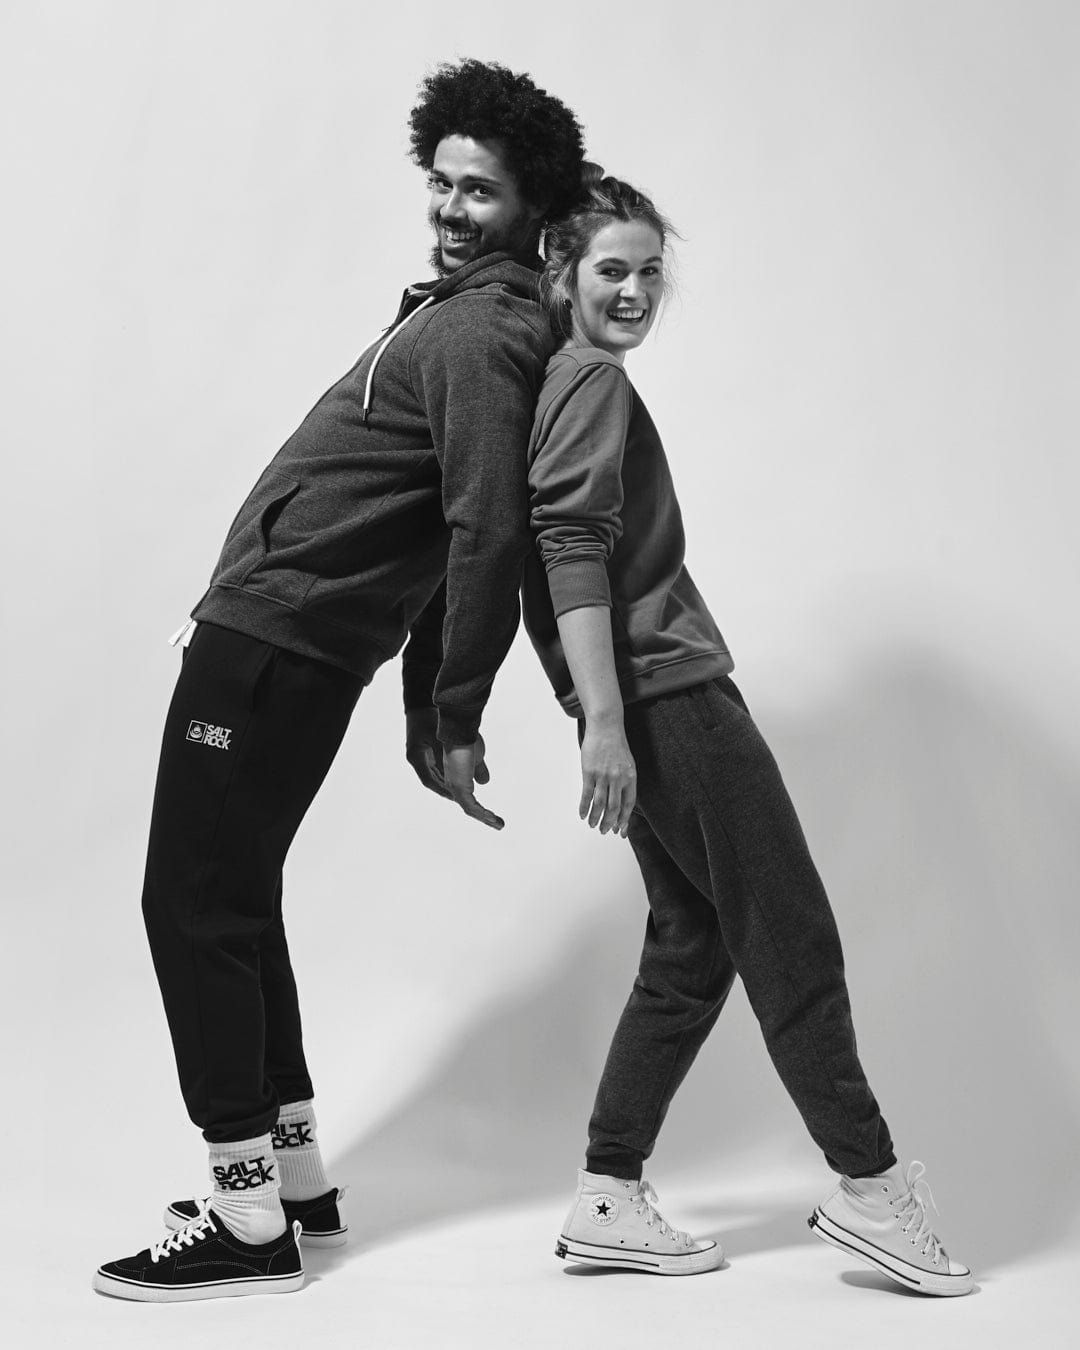 Two people standing back-to-back, wearing casual sportswear with Velator - Womens Joggers - Blue Marl from Saltrock and sneakers, smiling at the camera.